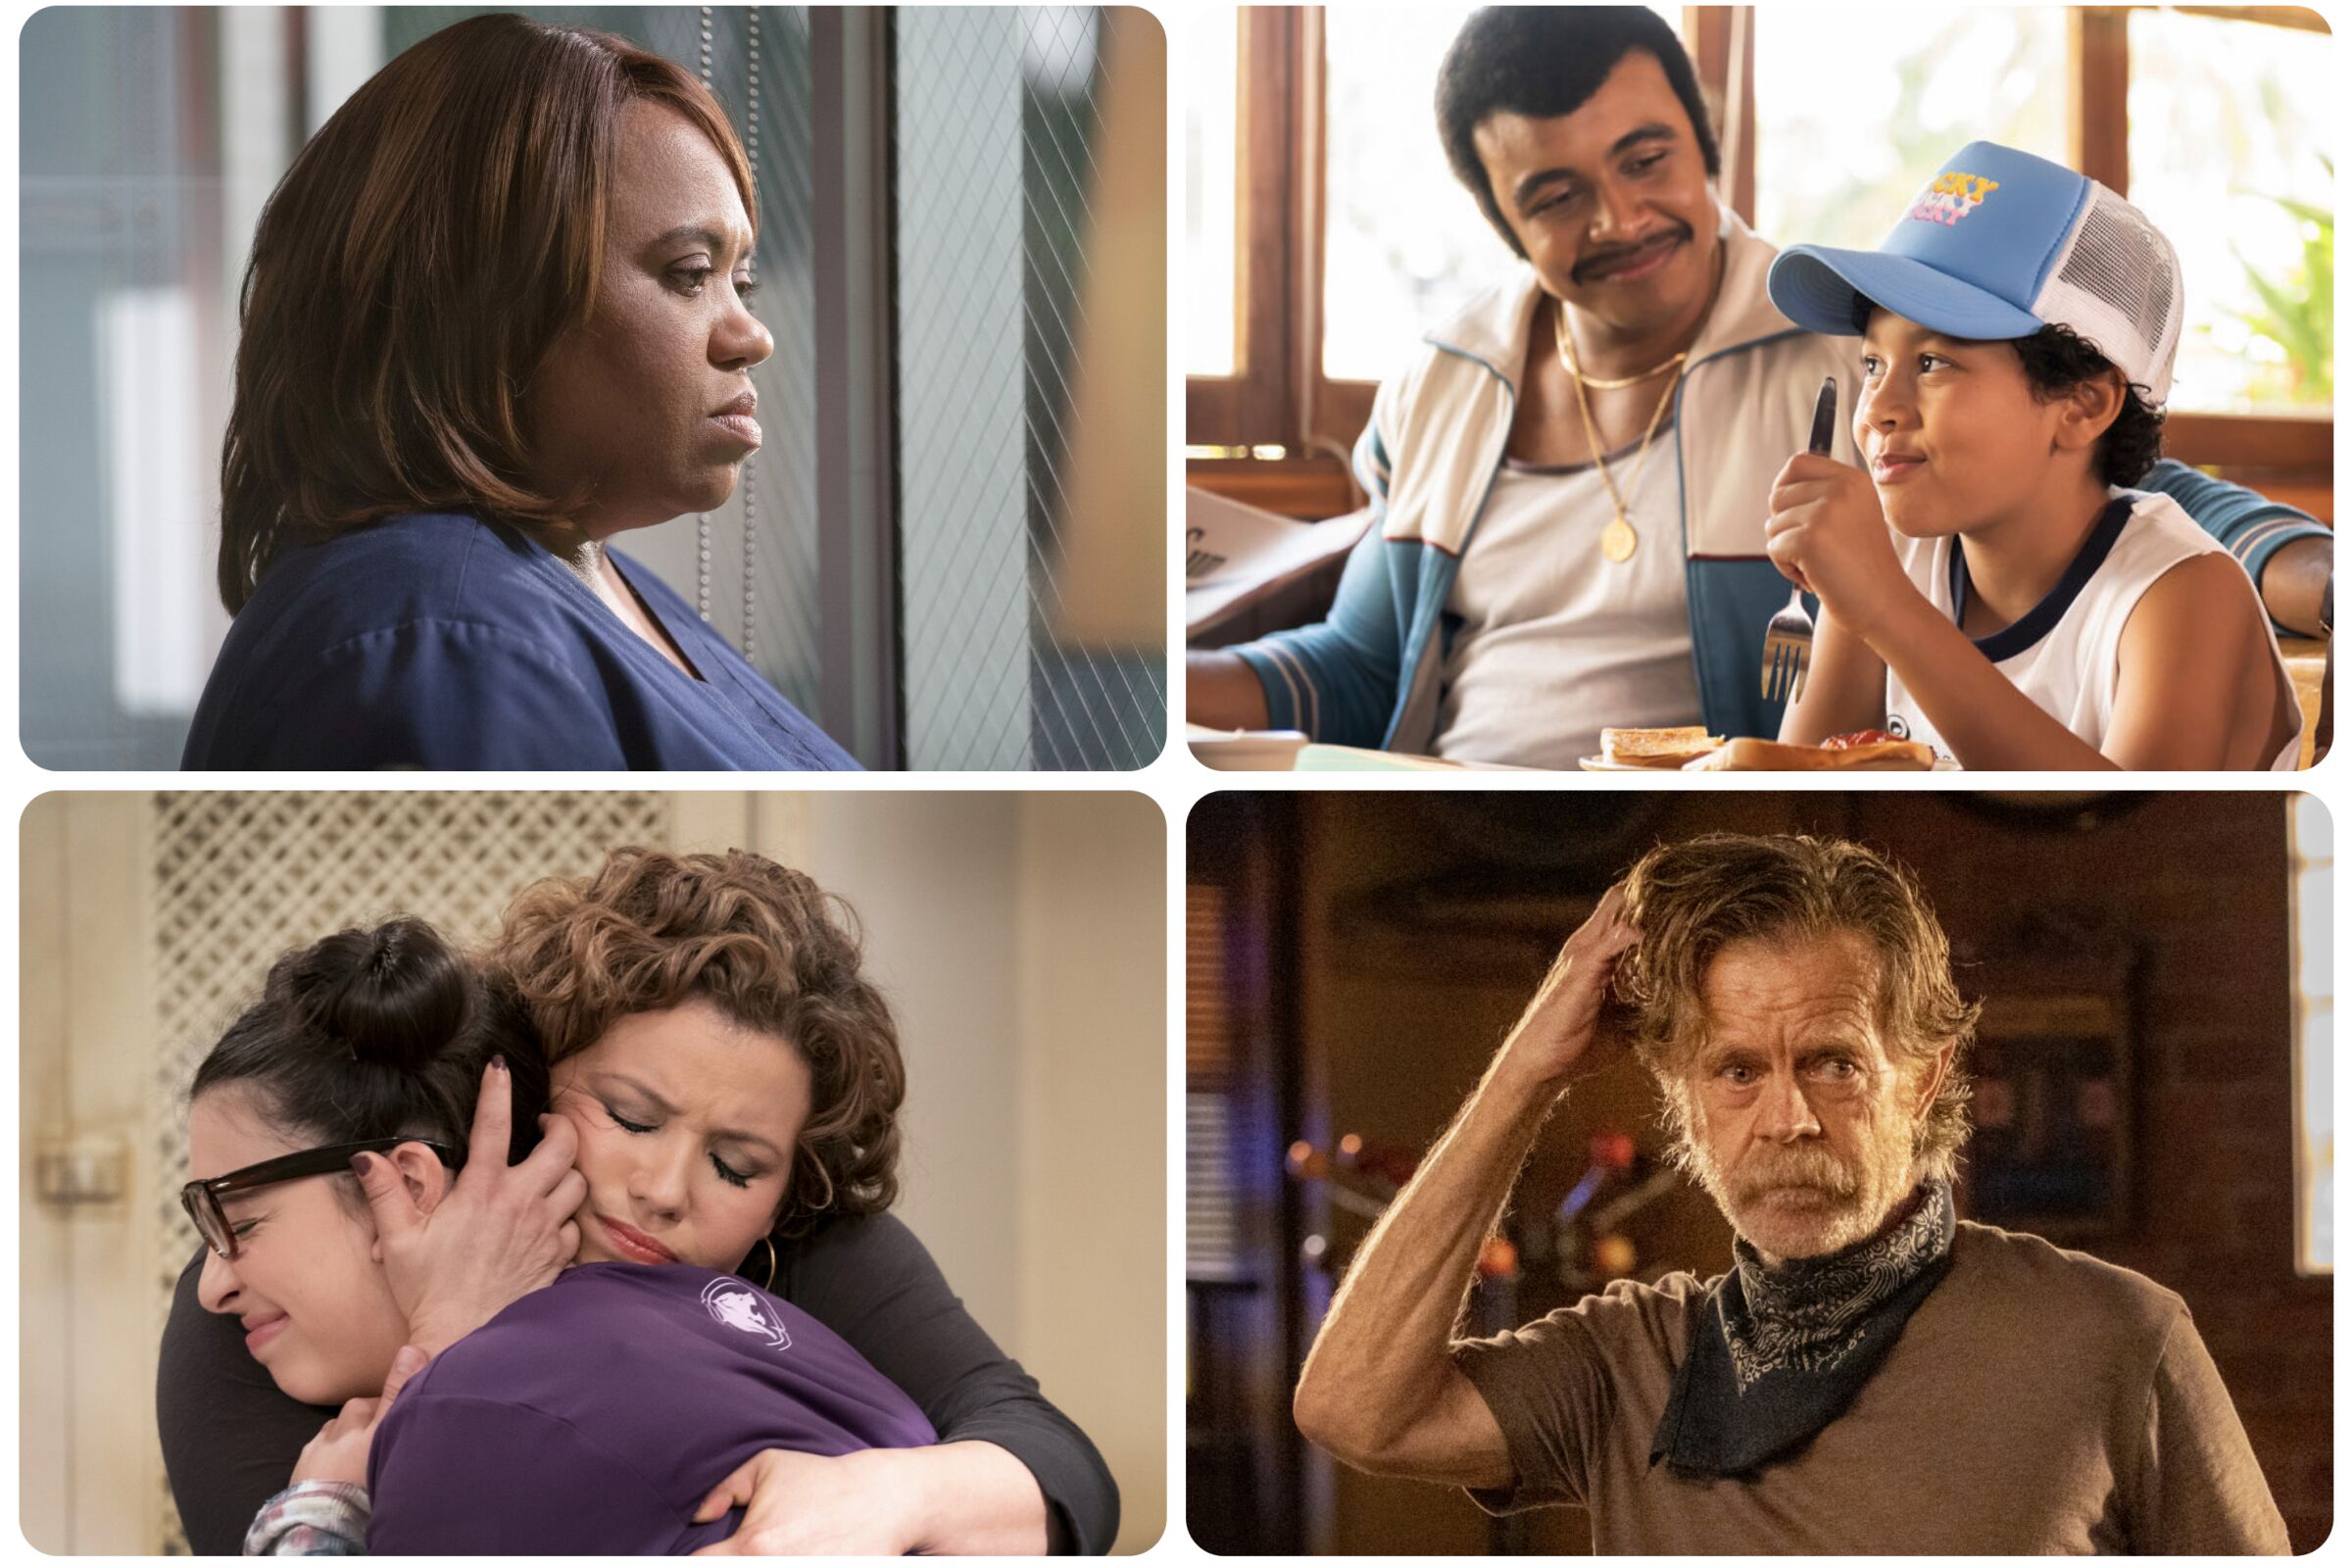 TV show stills show a woman in profile, a seated father and son, a man scratching his head and a mom hugging her daughter